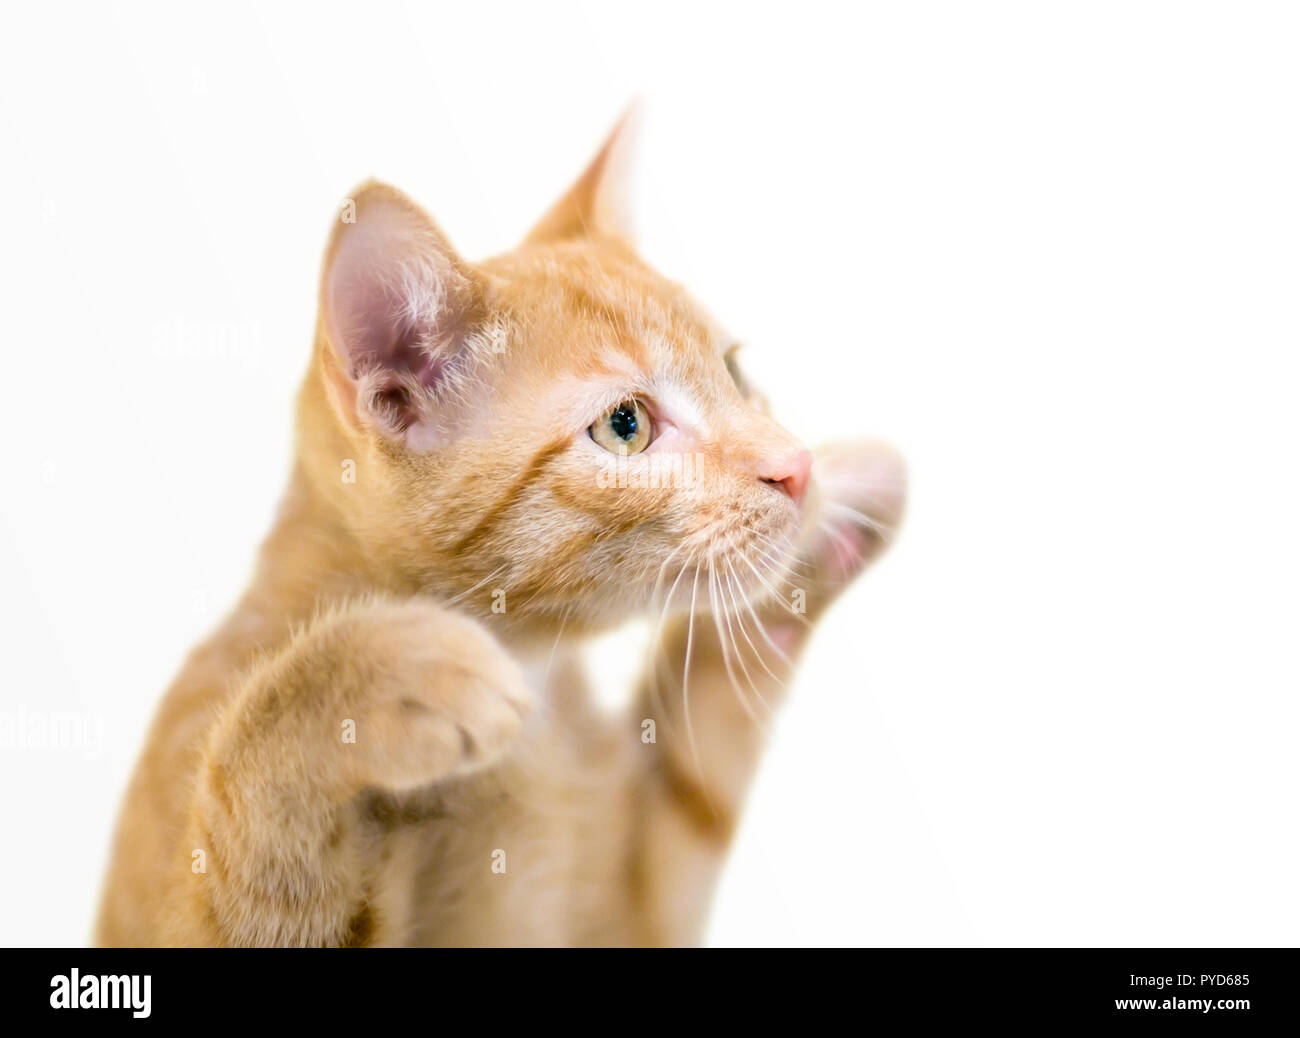 A cute orange tabby domestic shorthair kitten with its paws raised in a playful gesture Stock Photo